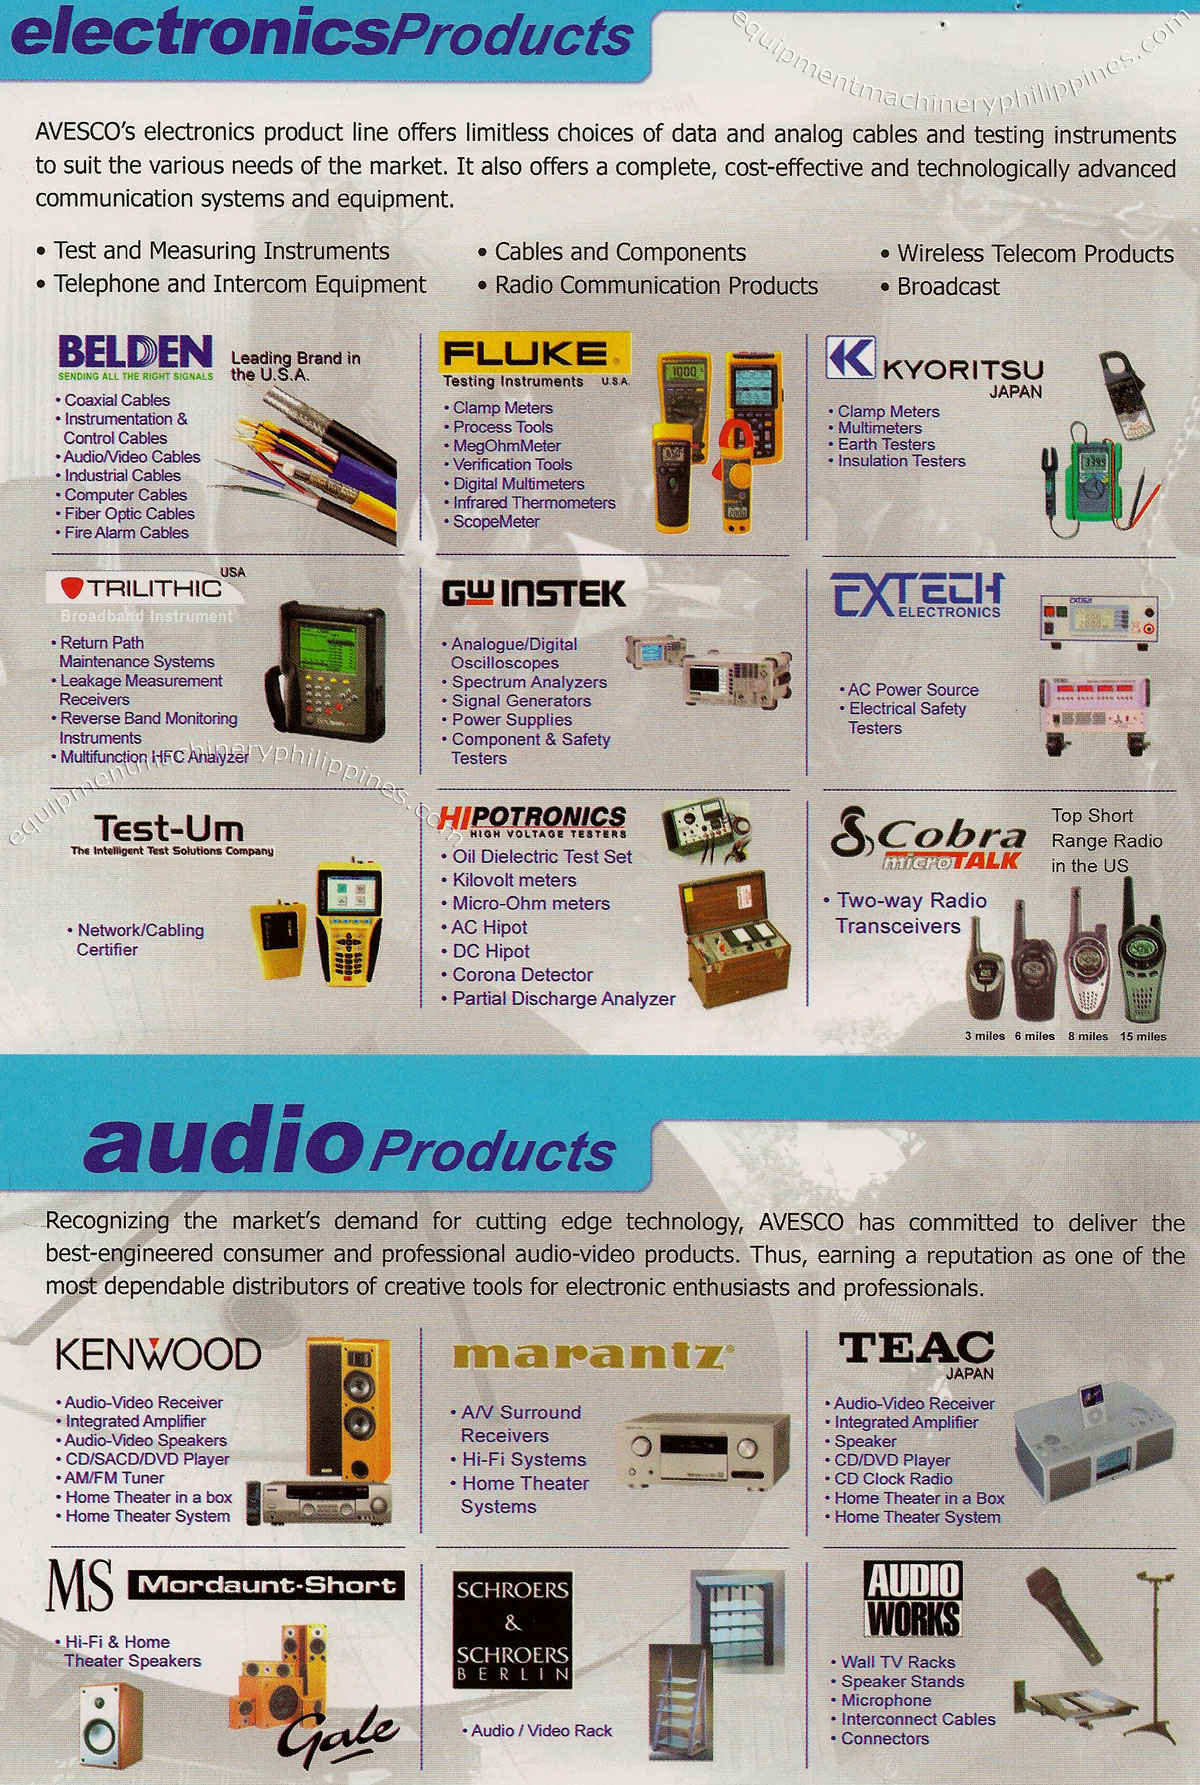 Electronics Testing and Measuring Instruments, Telephone and Intercom Equipment, Cables and Components, Radio Communication, Wireless Telecom, Broadcast, Consumer and Professional Audio Video